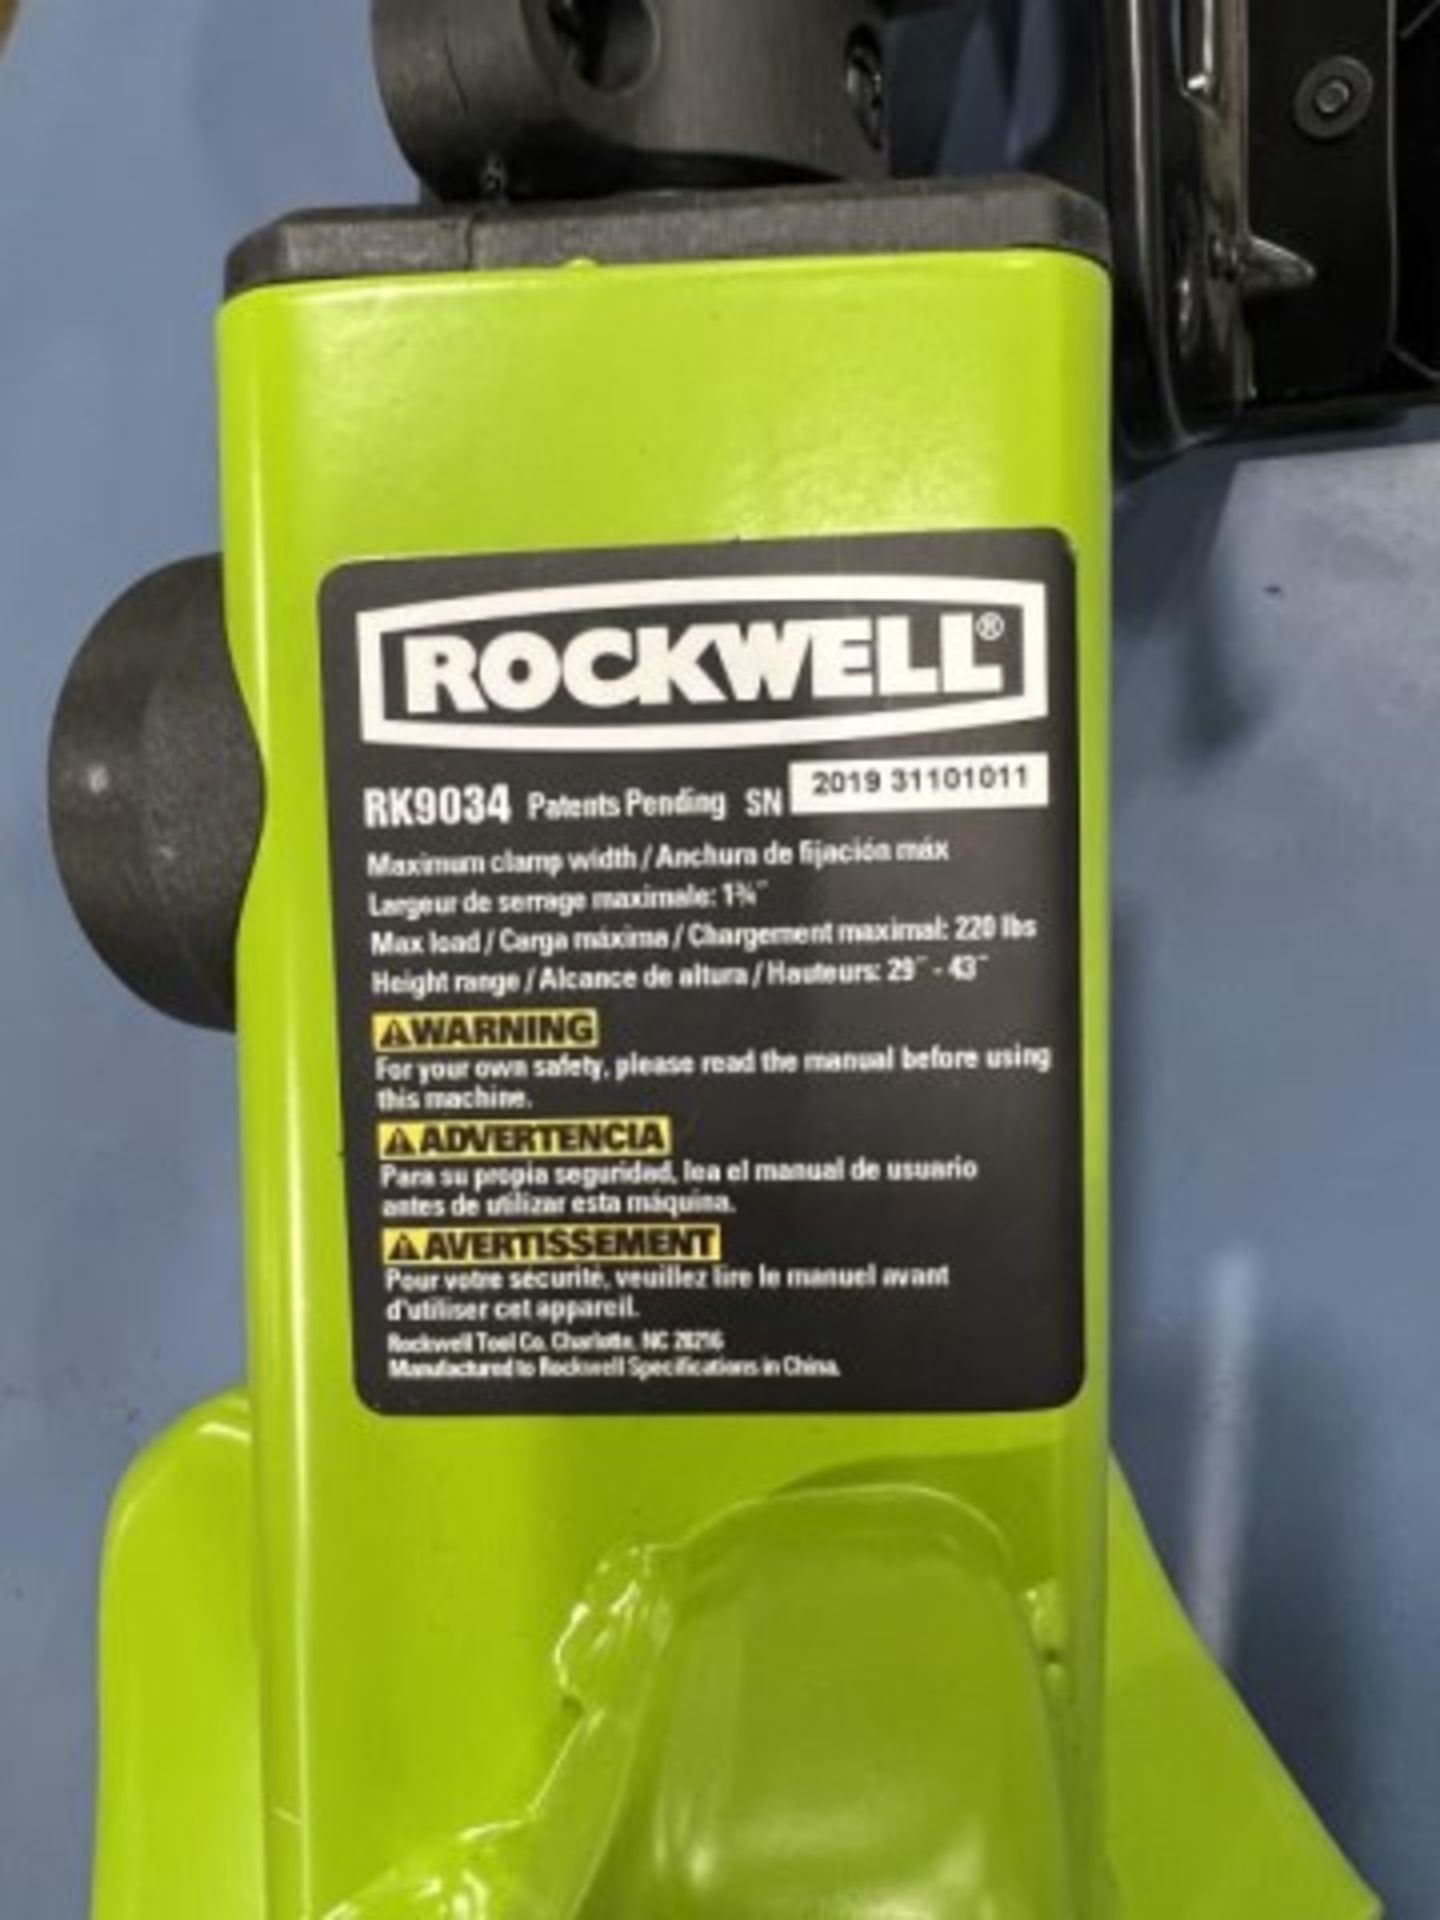 Rockwell Clamp Tool - Image 2 of 2